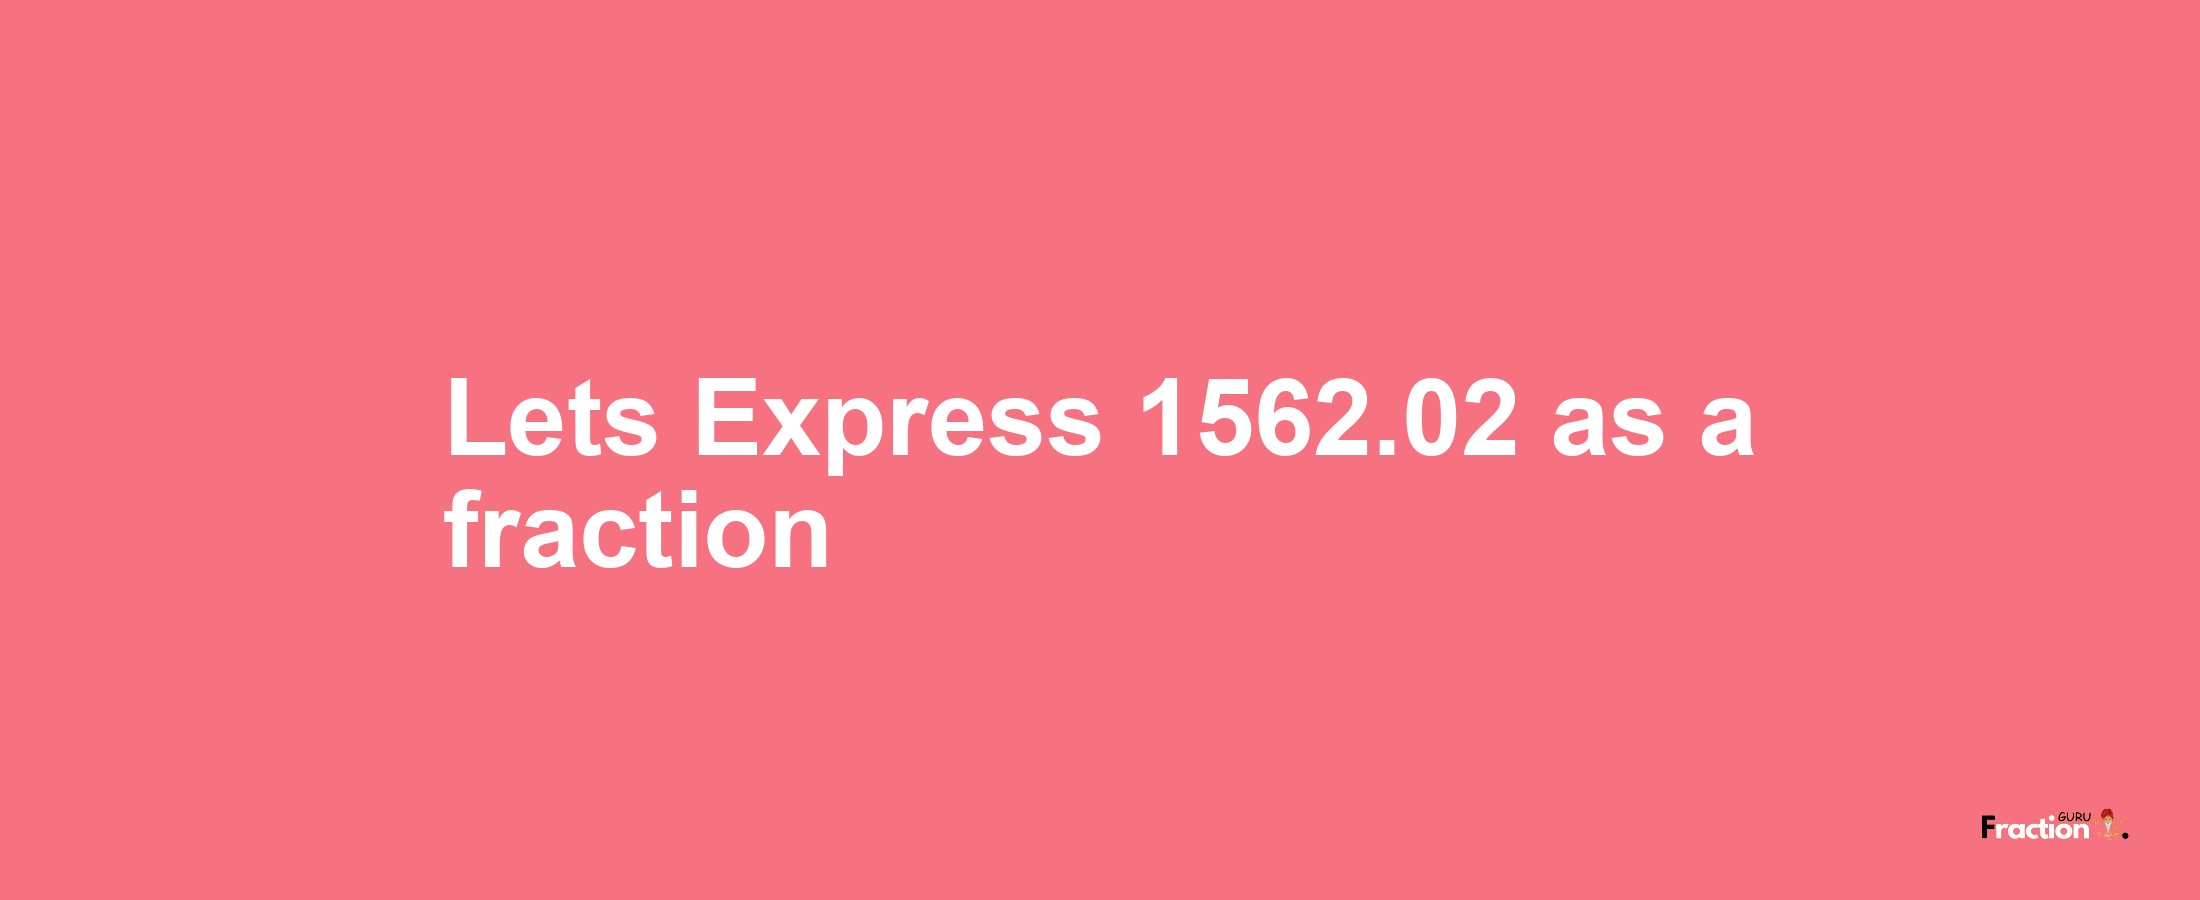 Lets Express 1562.02 as afraction